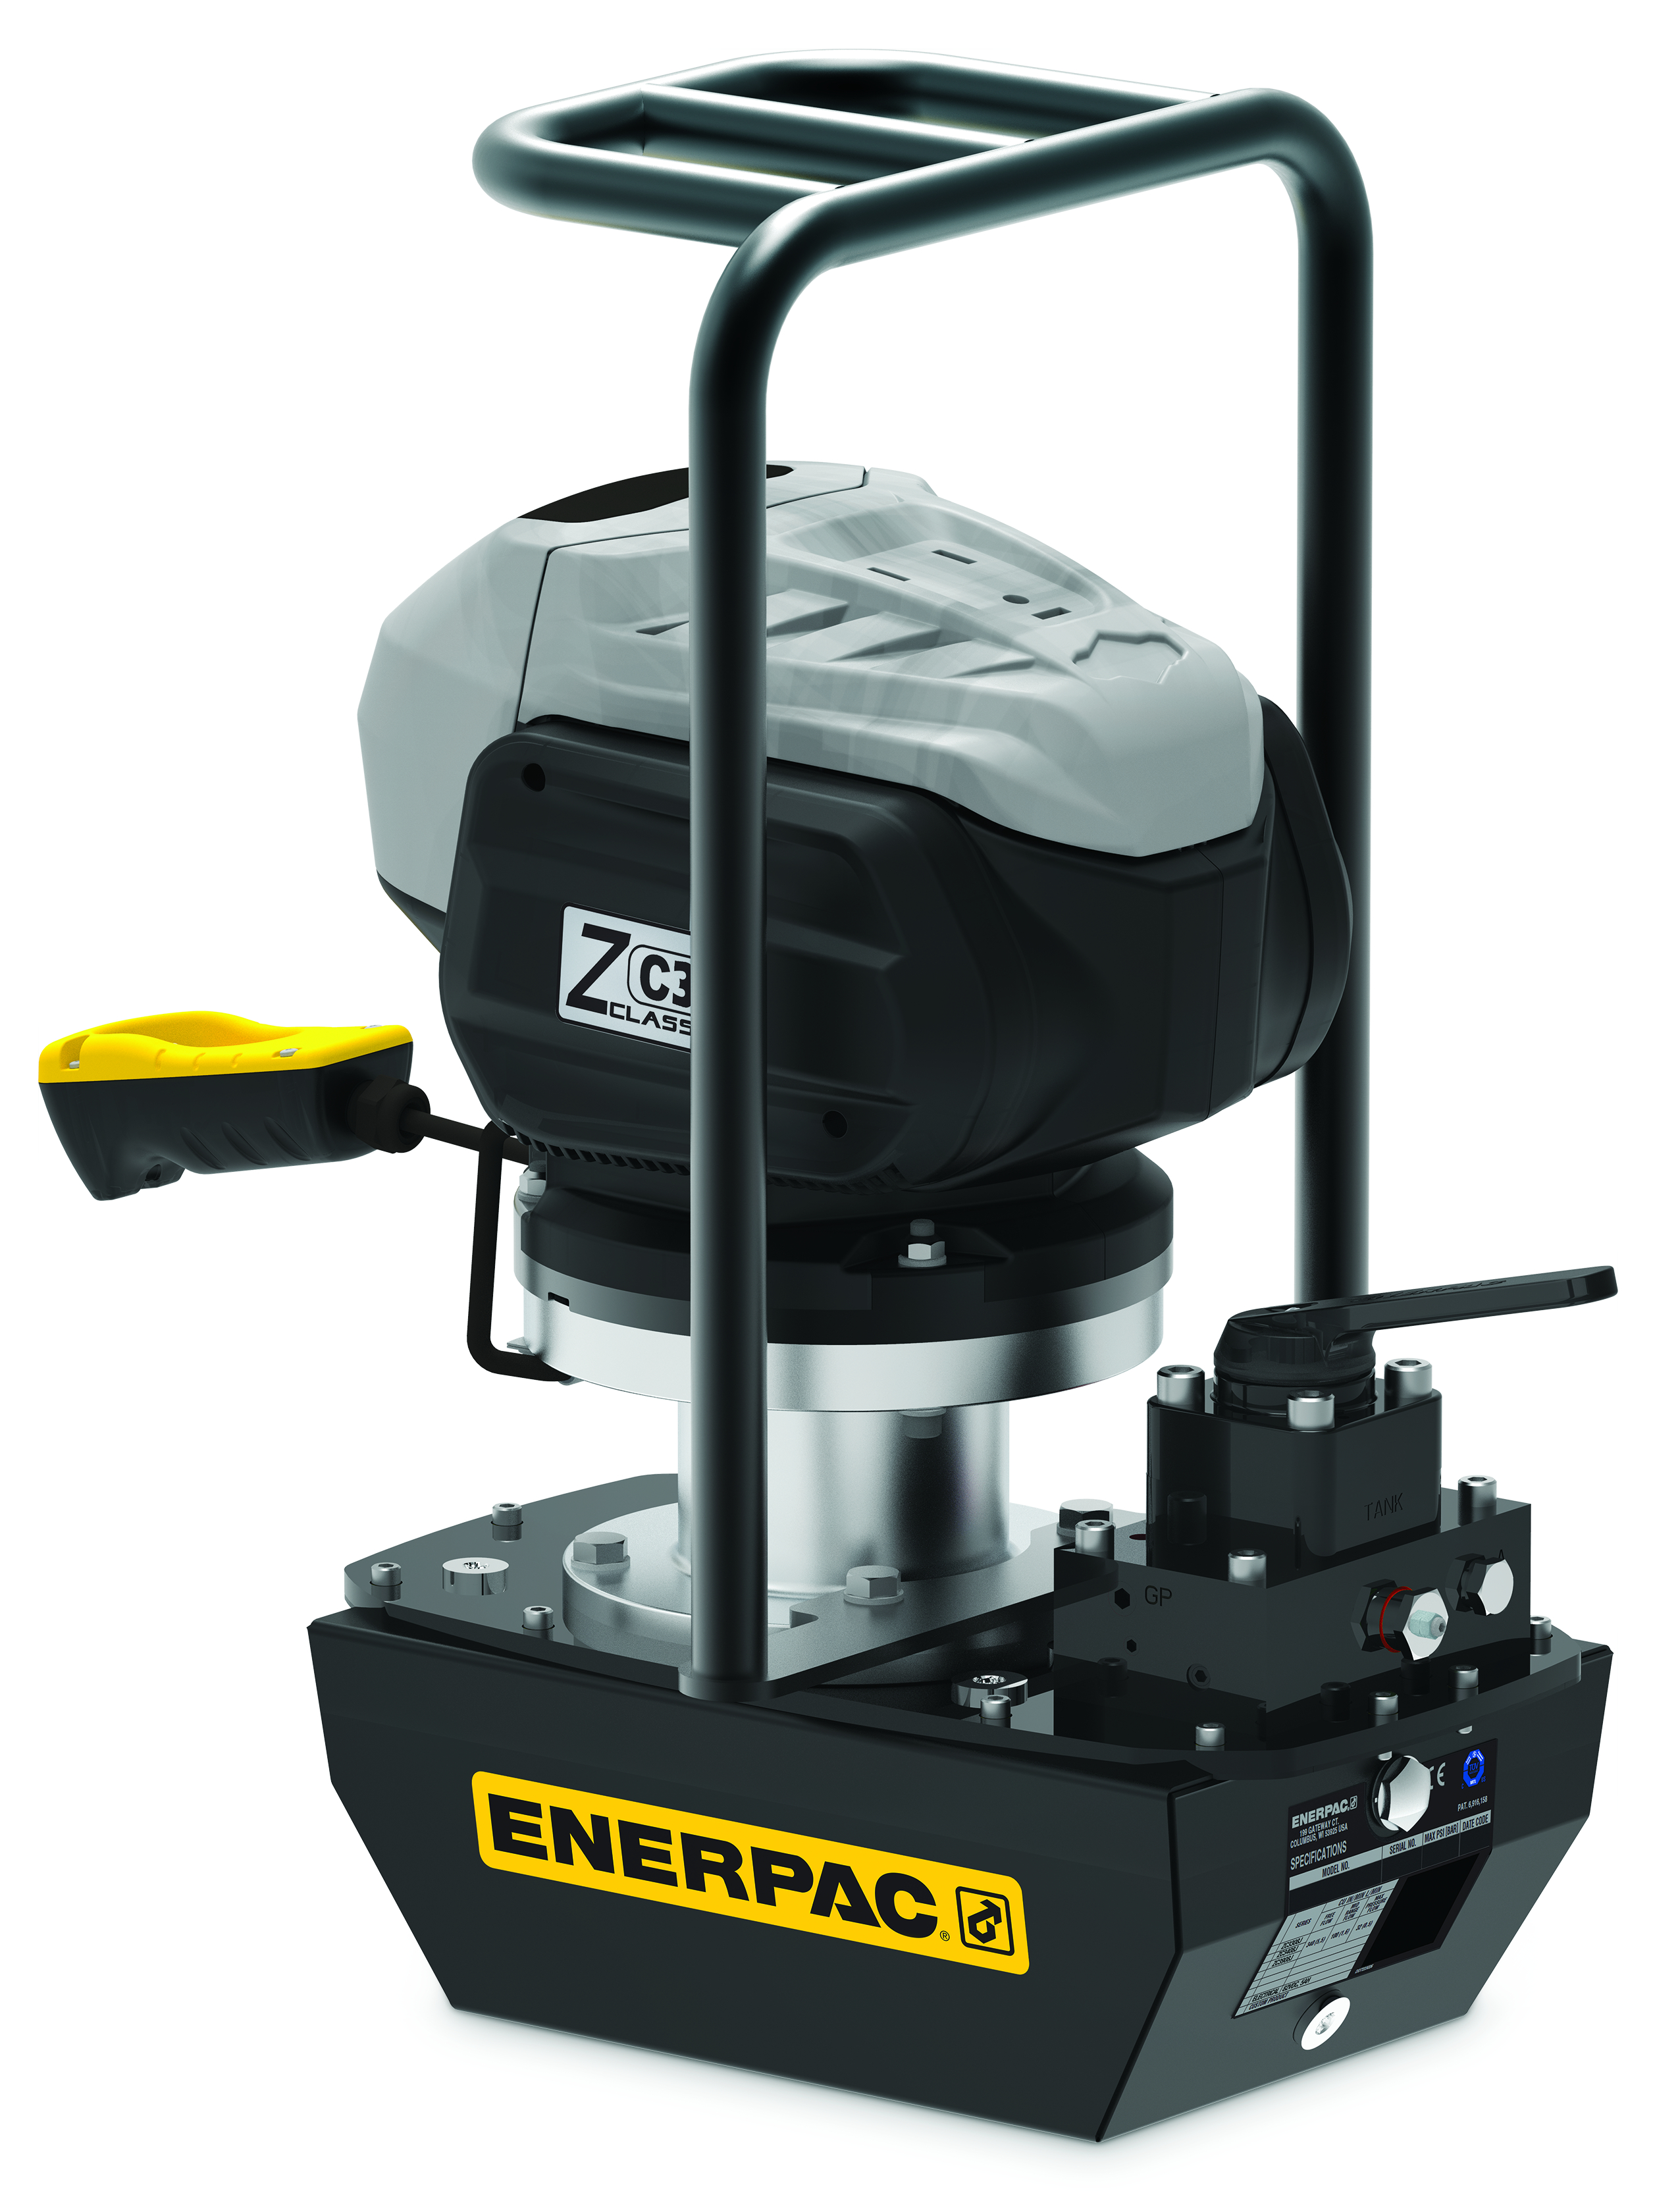 The Enerpac ZC-Series hydraulic pump is designed for remote industrial locations.